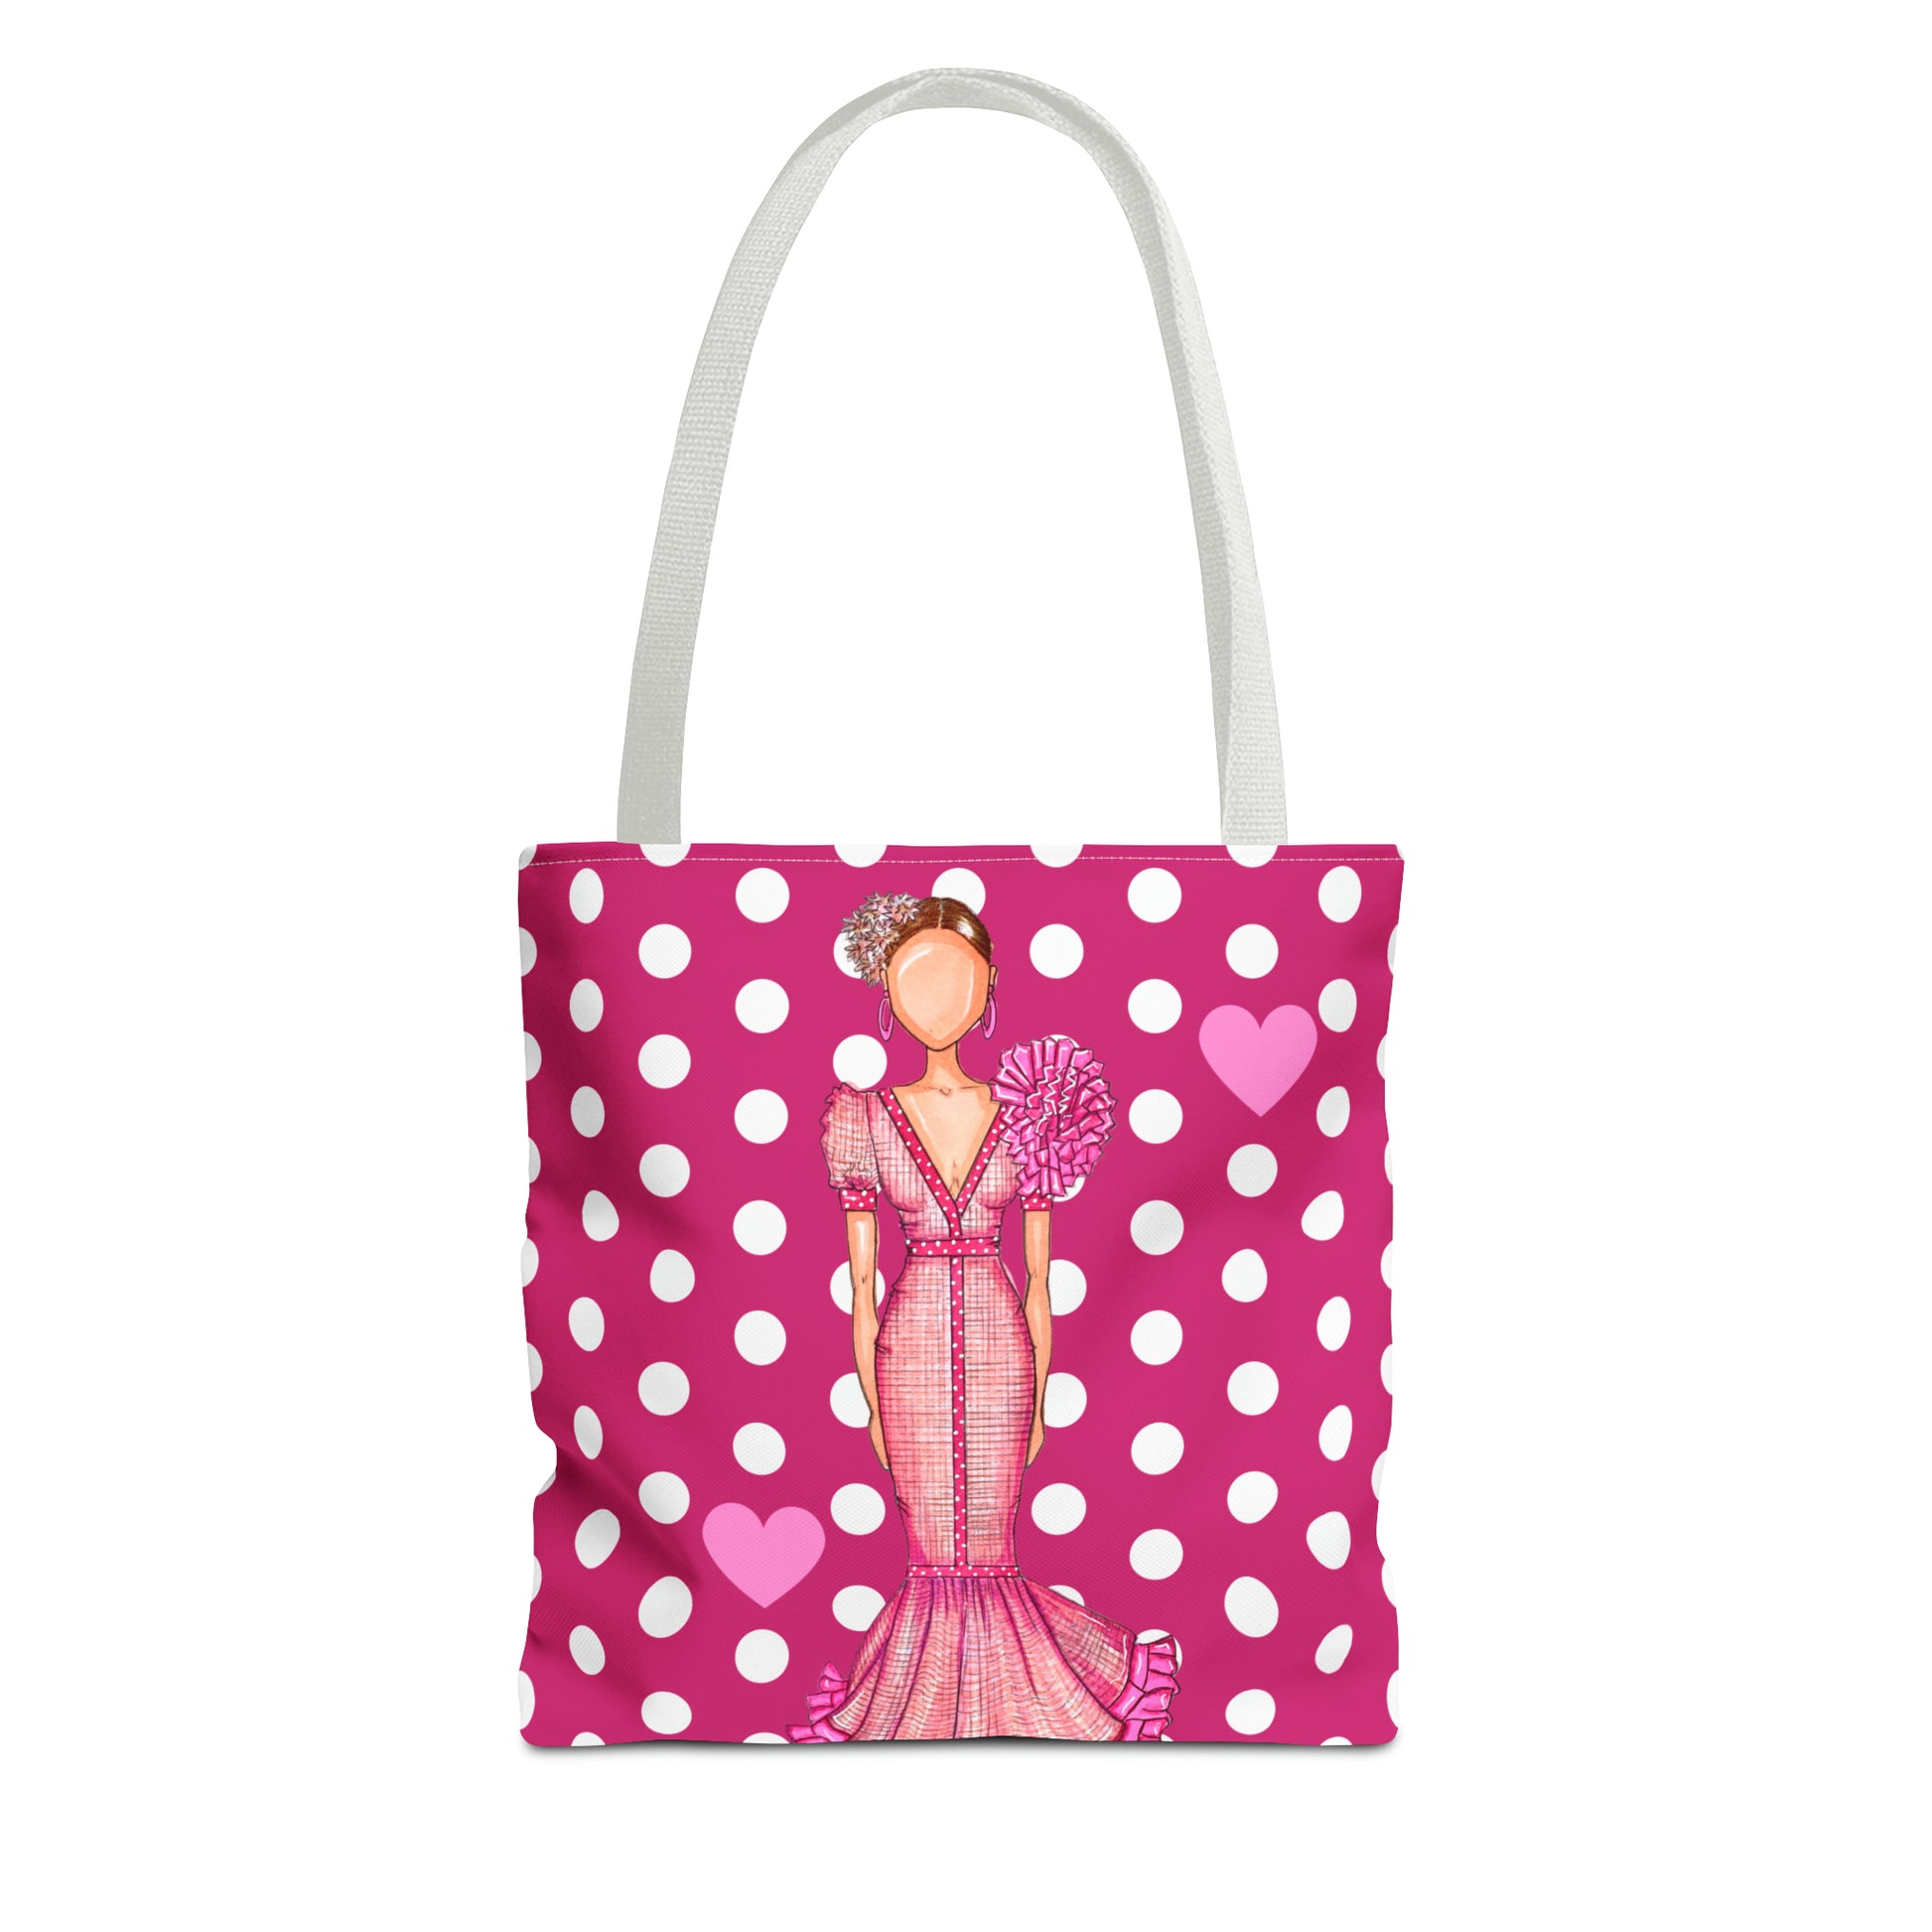 a pink and white polka dot bag with a woman in a pink dress